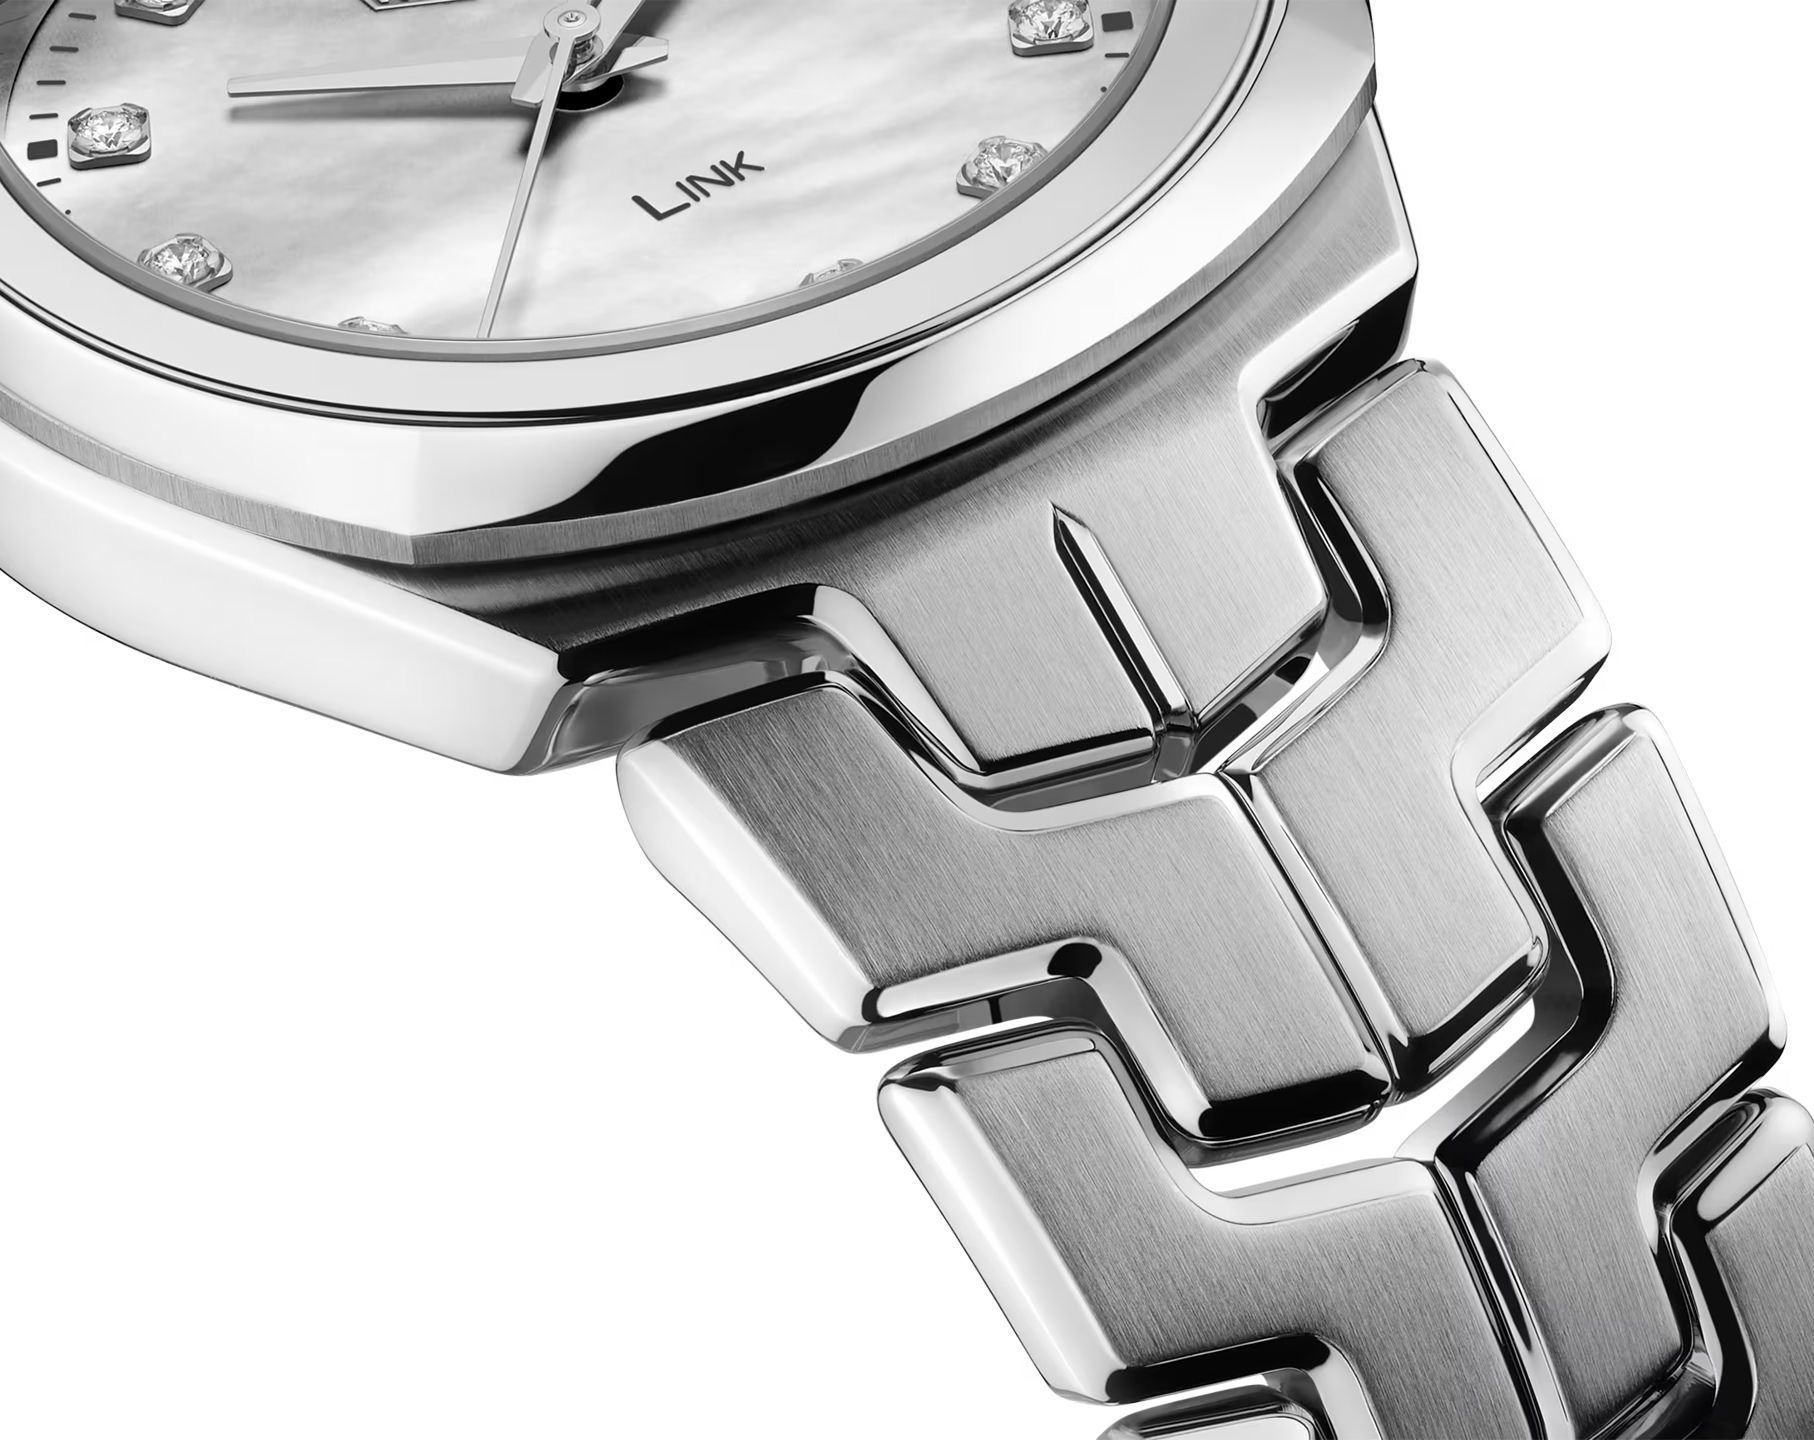 TAG Heuer  32 mm Watch in MOP Dial For Women - 4